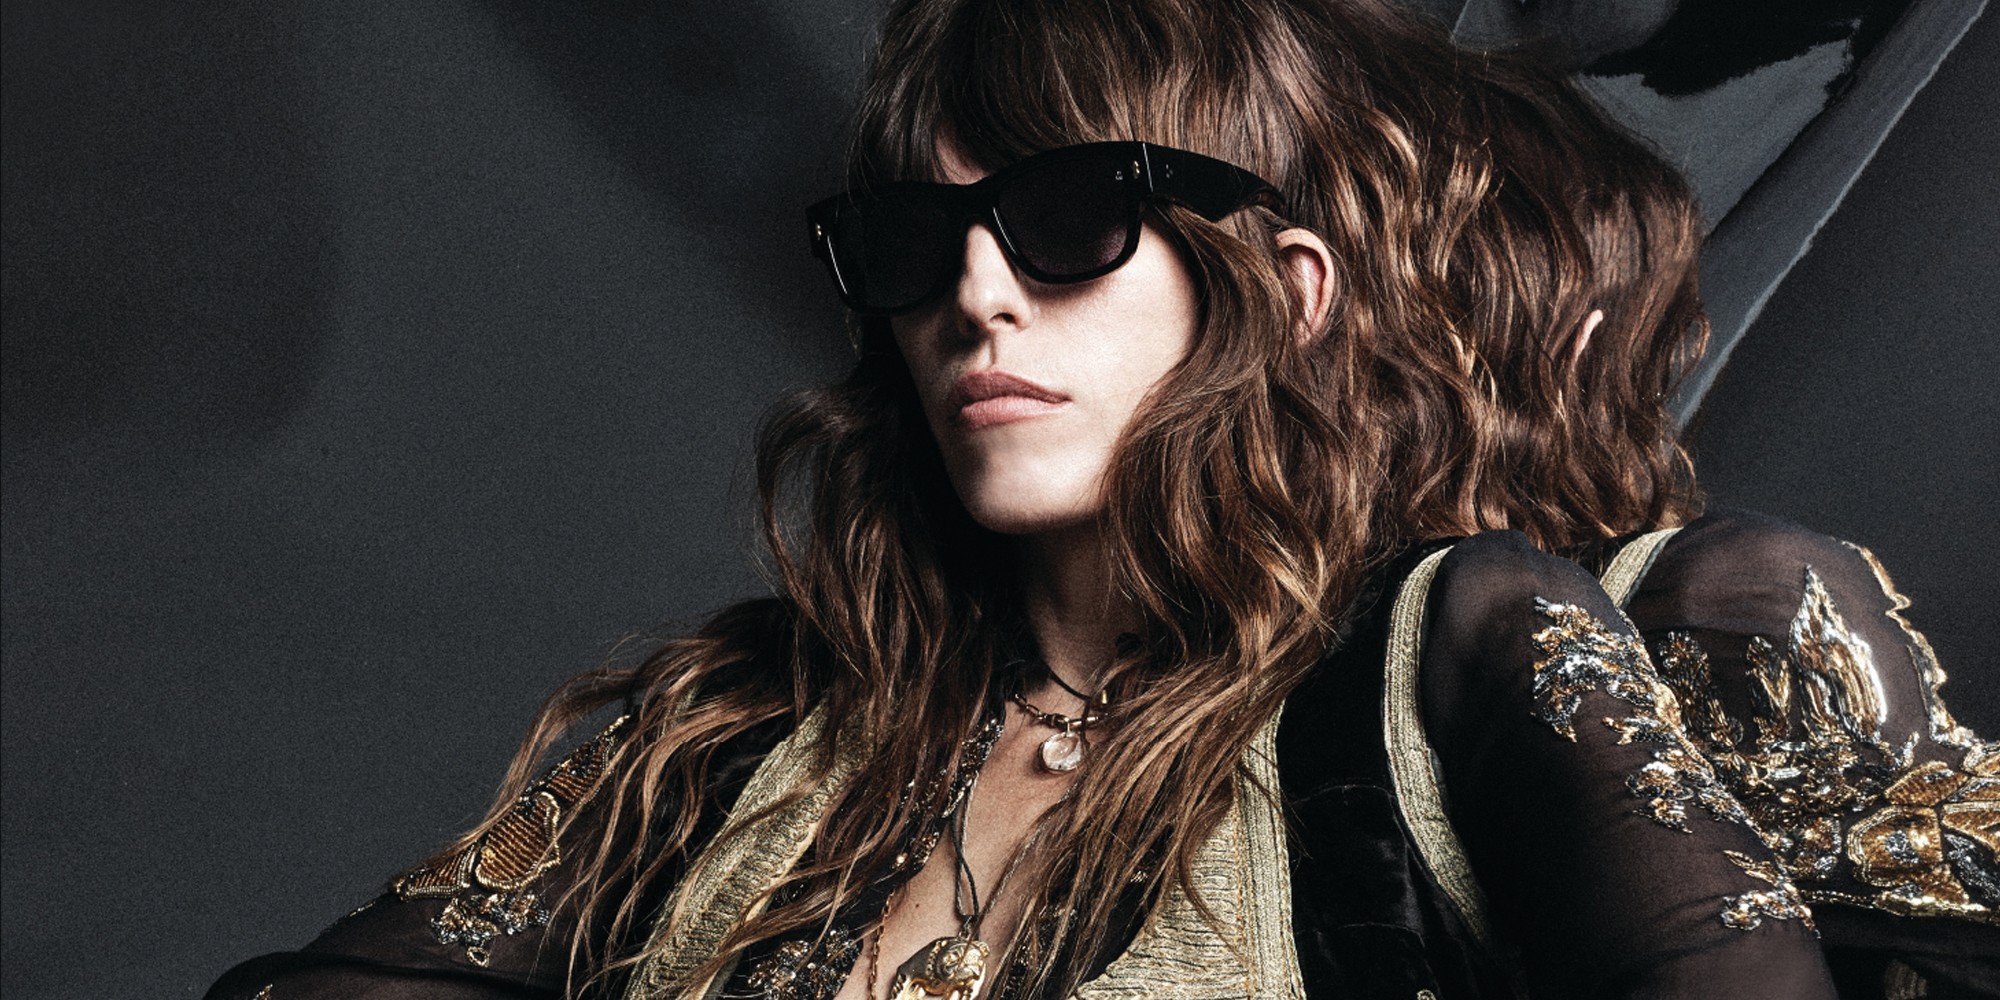 JACQUES MARIE MAGE SUMMER 2020 AD CAMPAIGN FEATURING LOU DOILLON